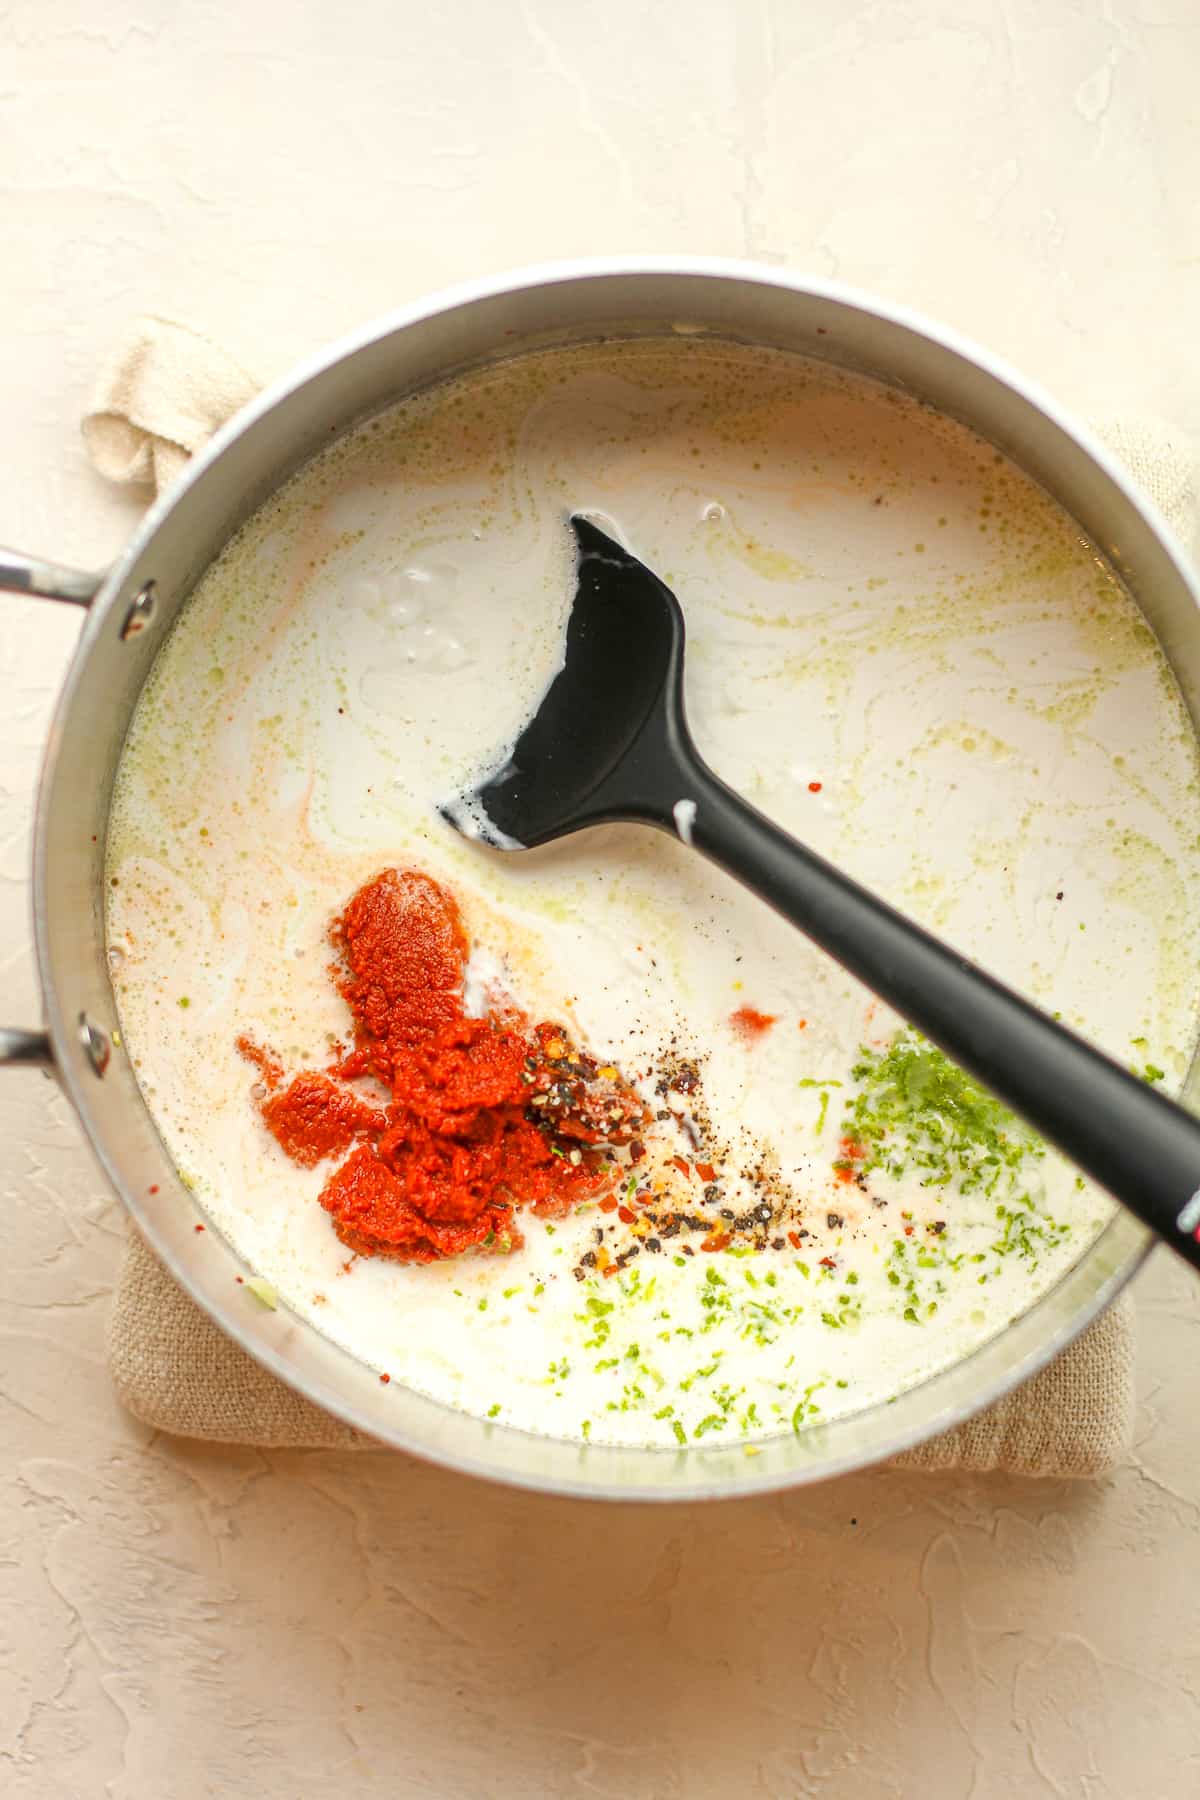 A pan of the curry sauce ingredients before combining.